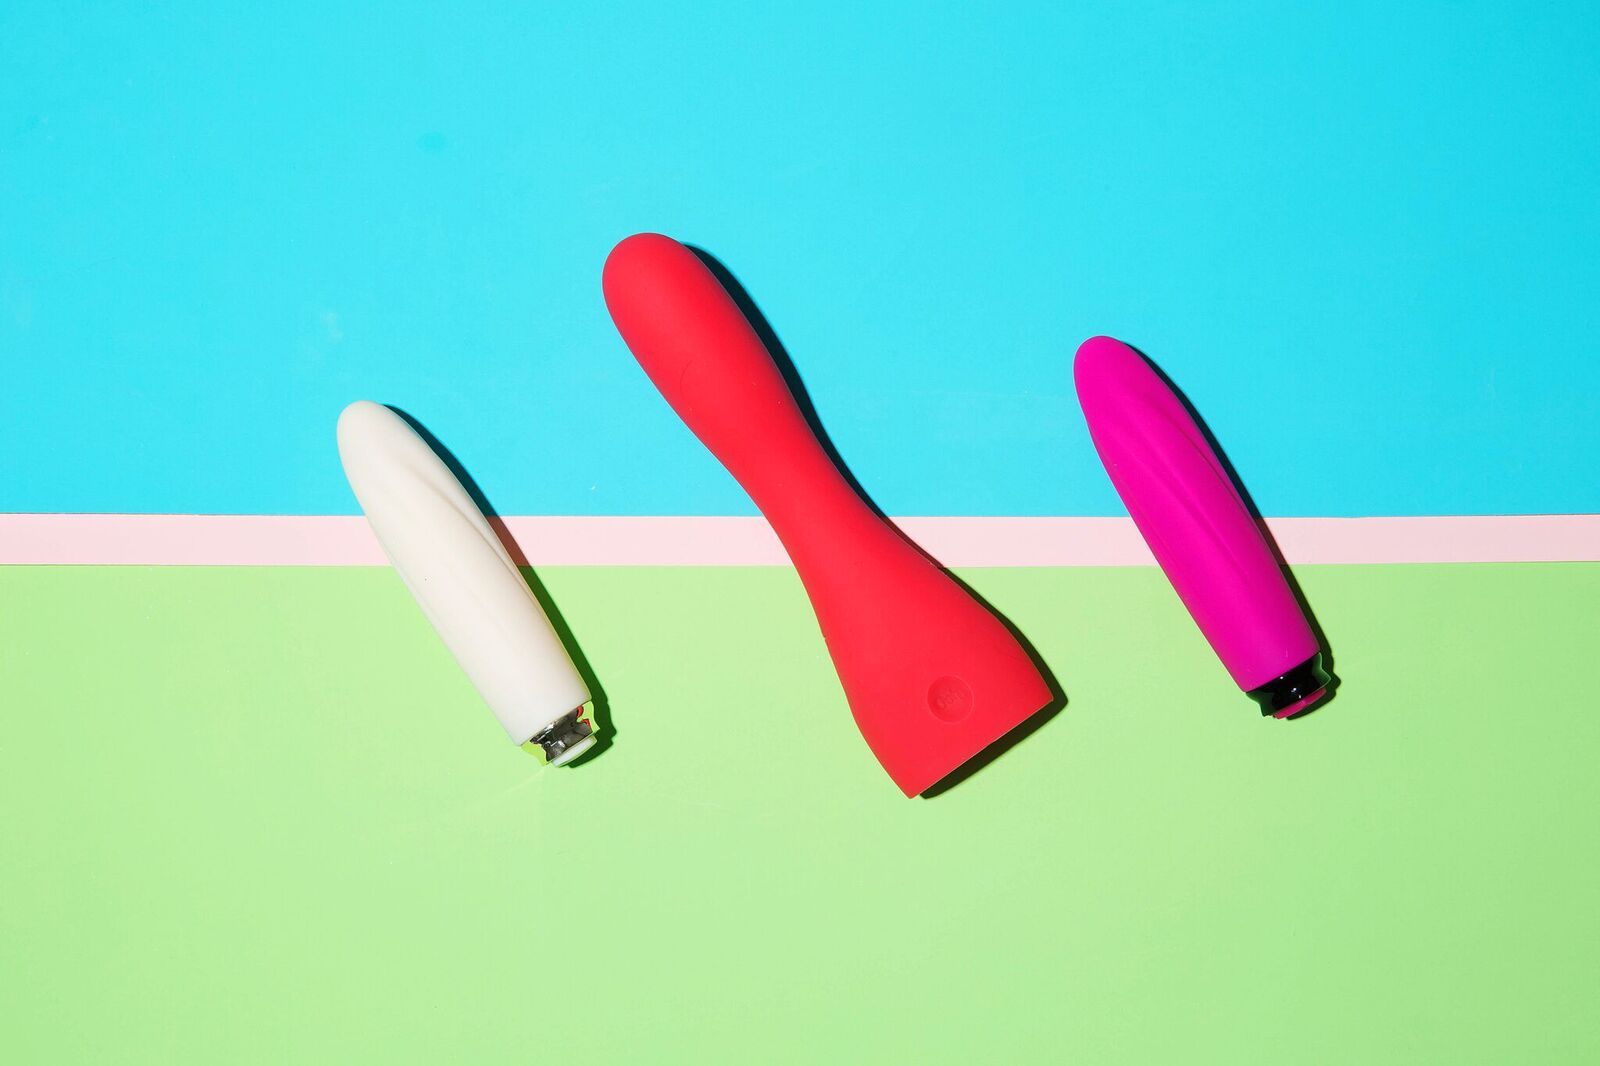 17 Sex Toy Horror Stories That Will Make You Cringe Forever